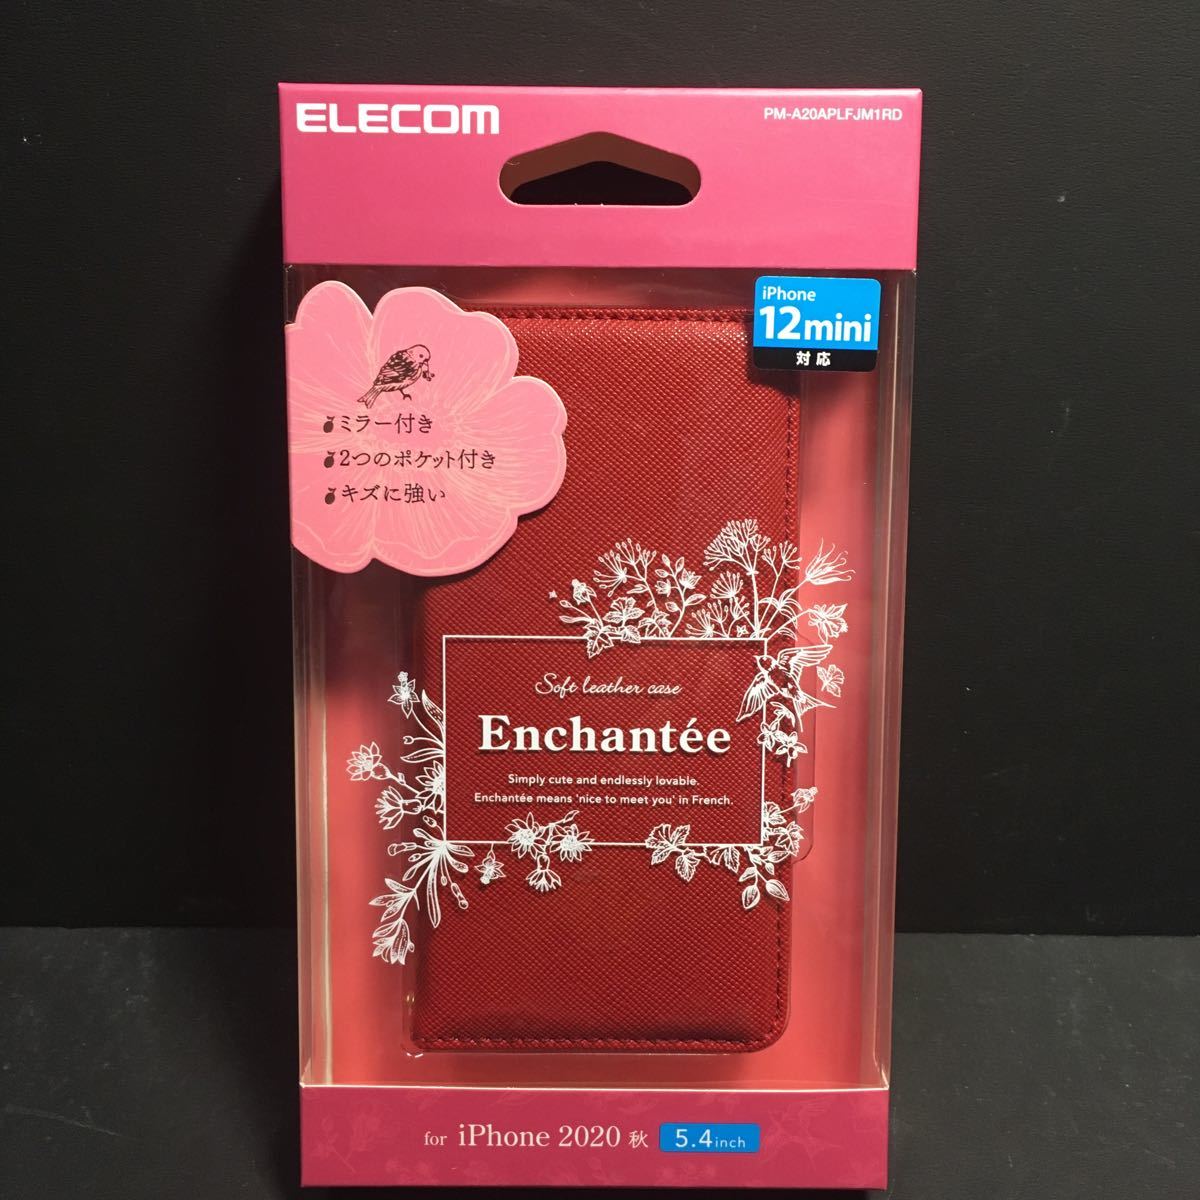  new goods Elecom iPhone 12 mini for 5.4 -inch notebook type case Enchante\'e PM-A20APLFJM1RD mirror attaching regular price =2940 jpy A2398.Enchantee